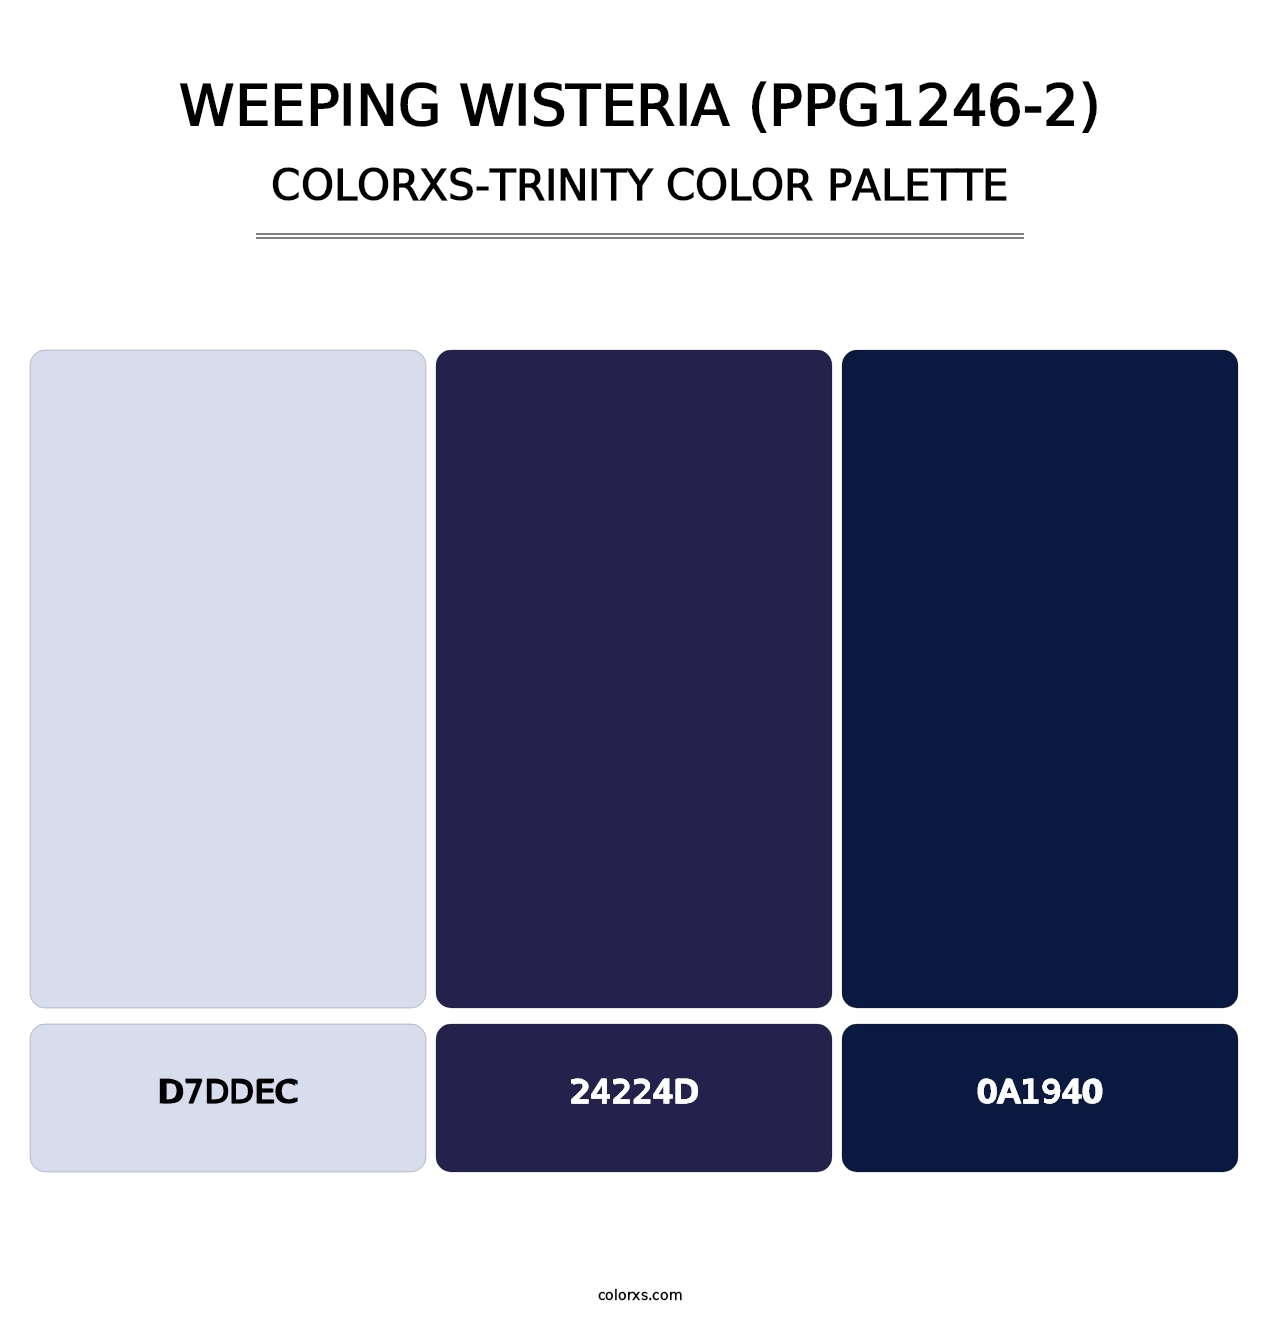 Weeping Wisteria (PPG1246-2) - Colorxs Trinity Palette